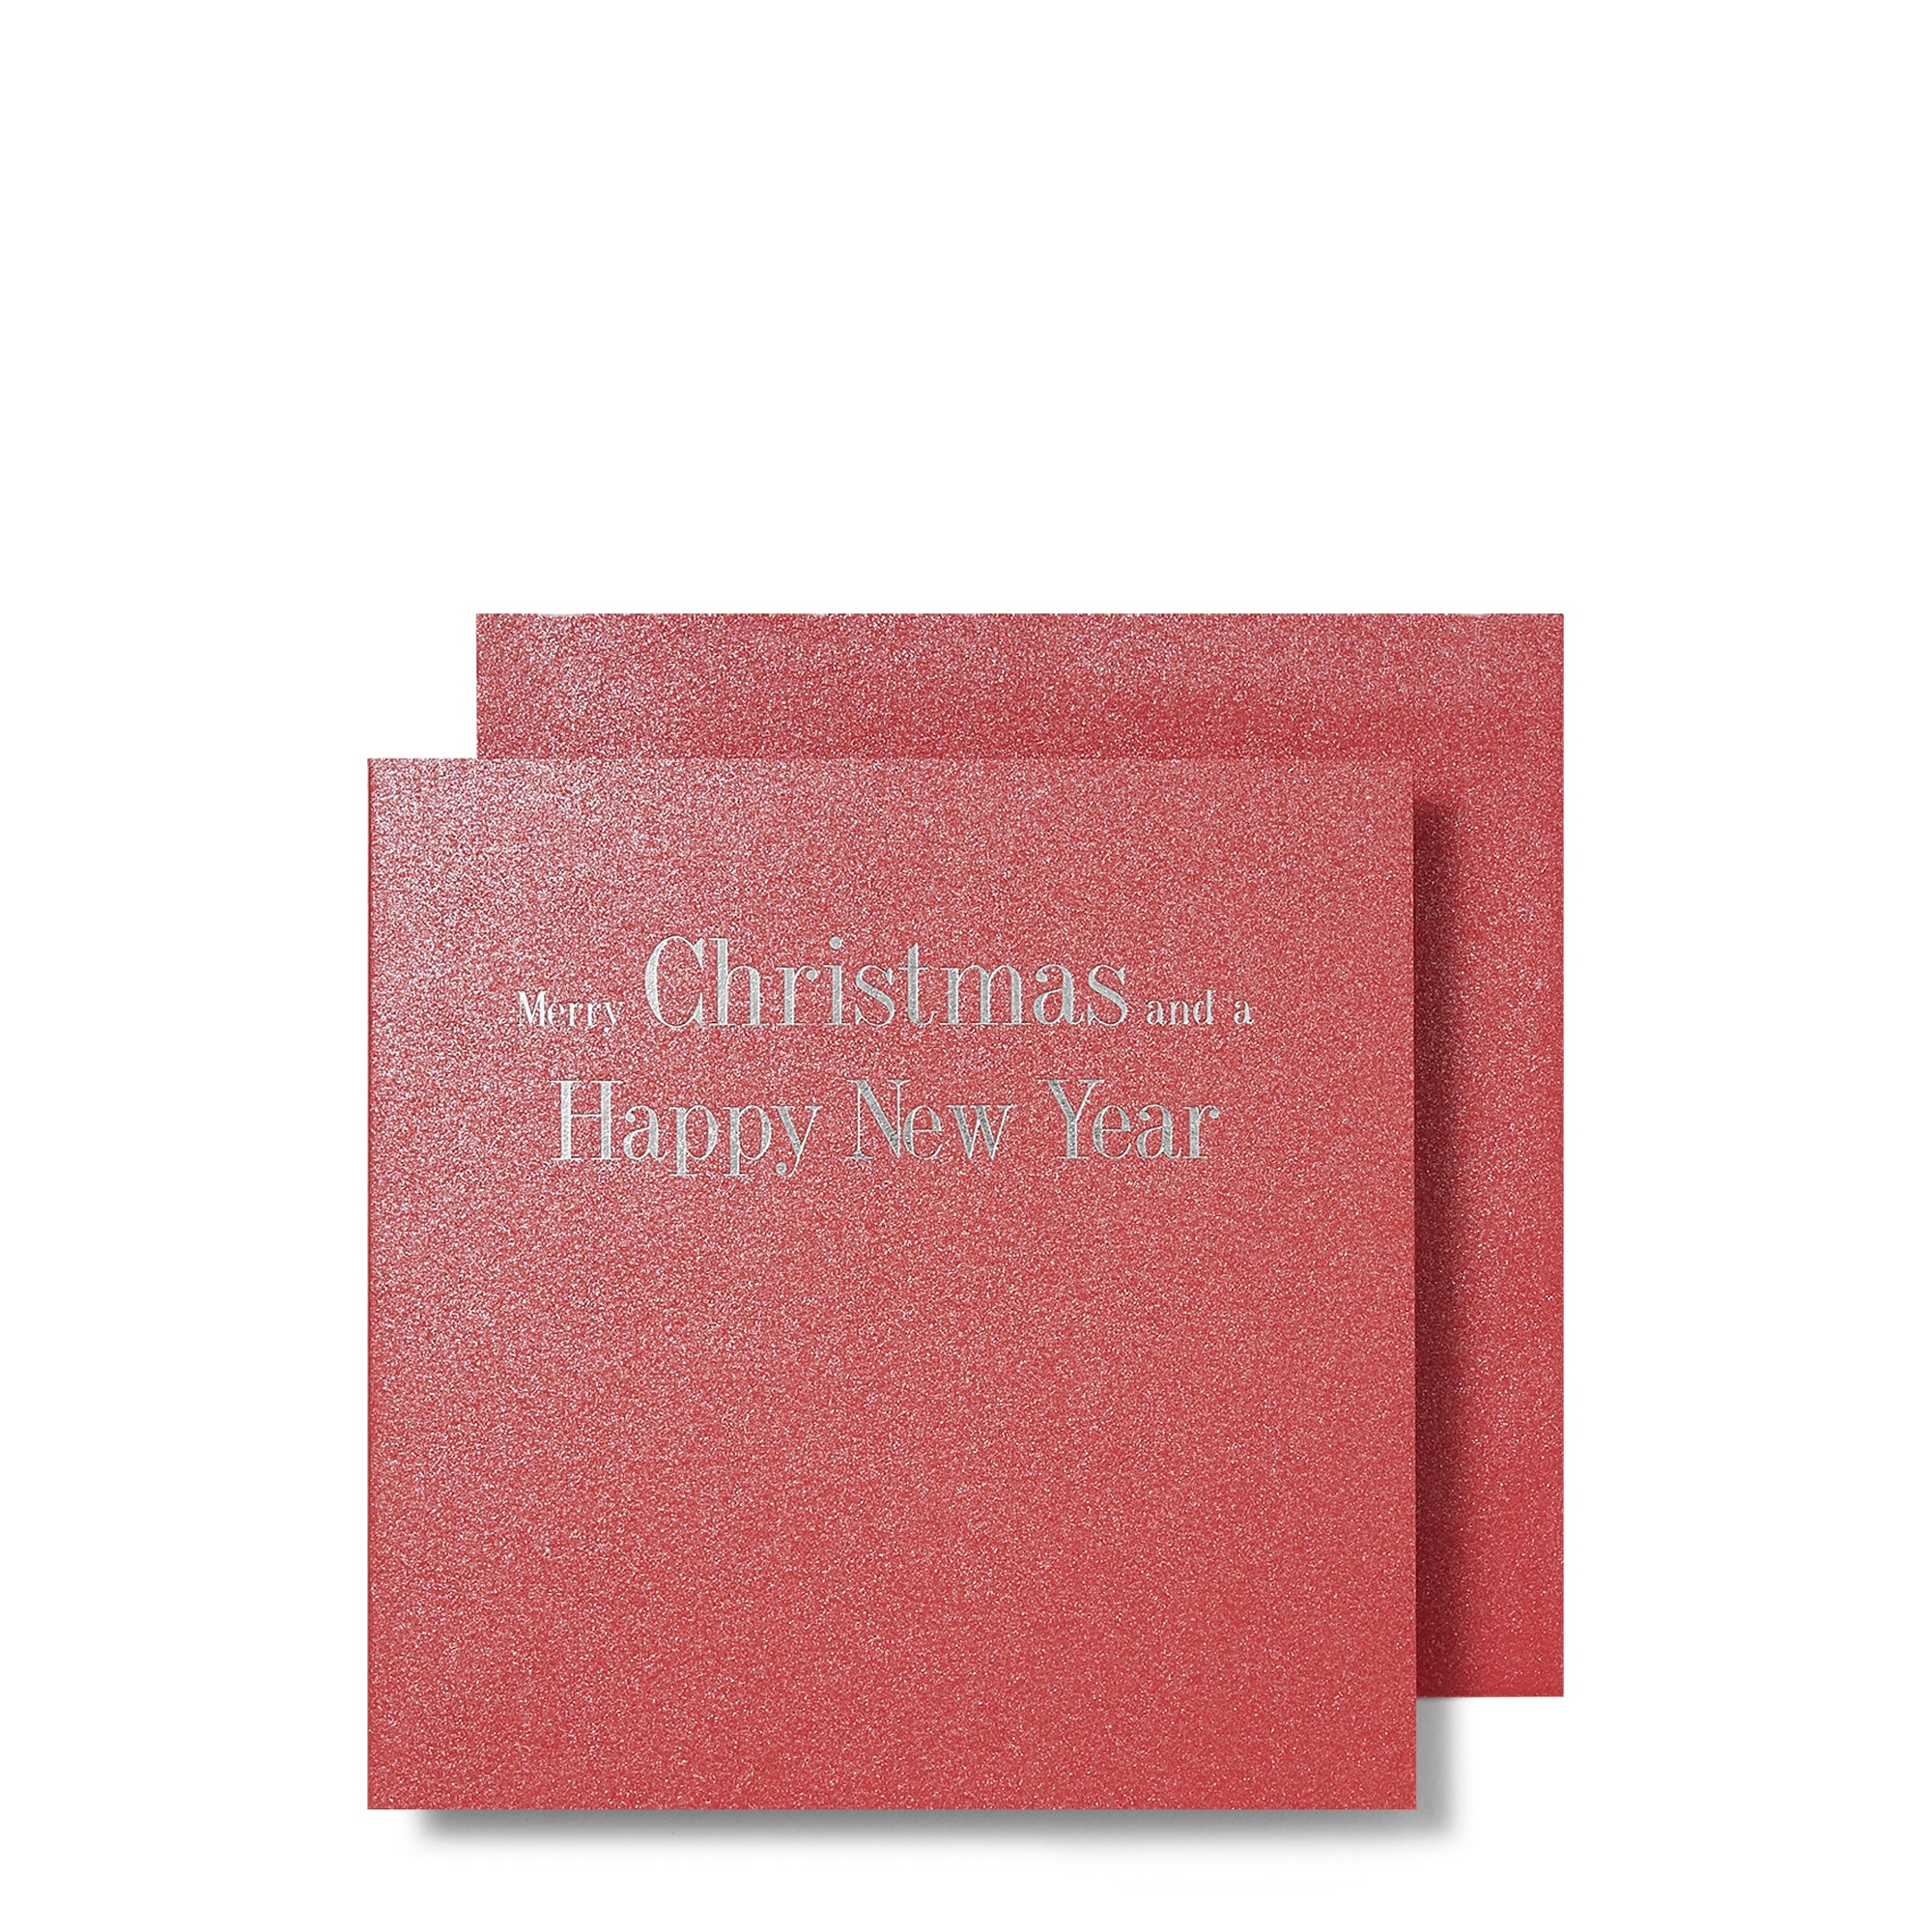 Christmas and New Year Silver Foiled Mini Cards, with Envelope | Boxed Set of 6 | Story of Elegance